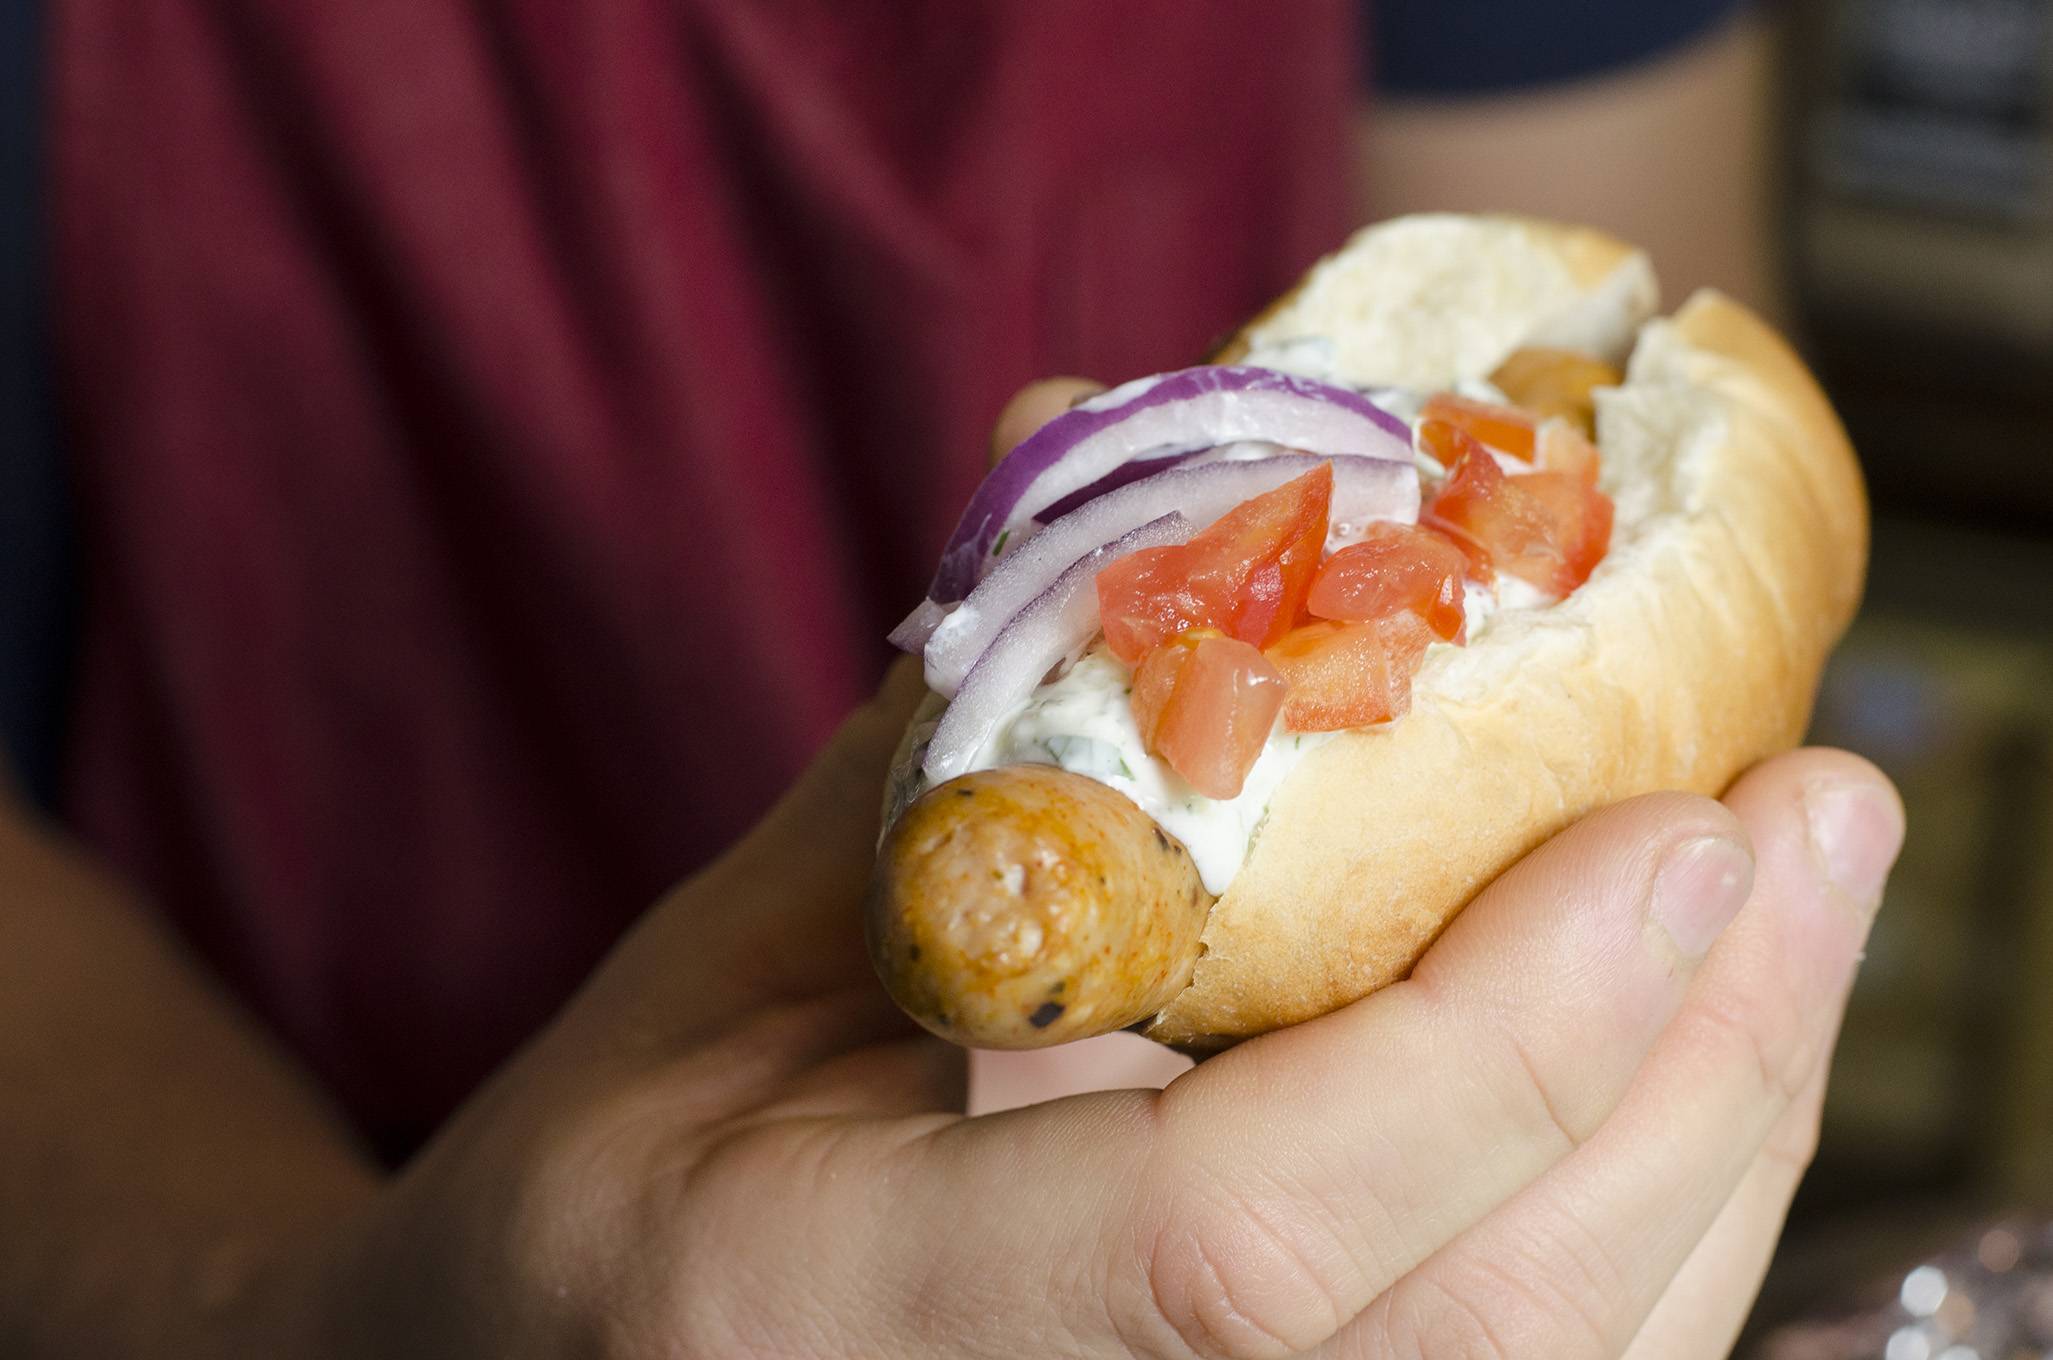 Opa! The chicken gyro sausage is absolutely delicious.